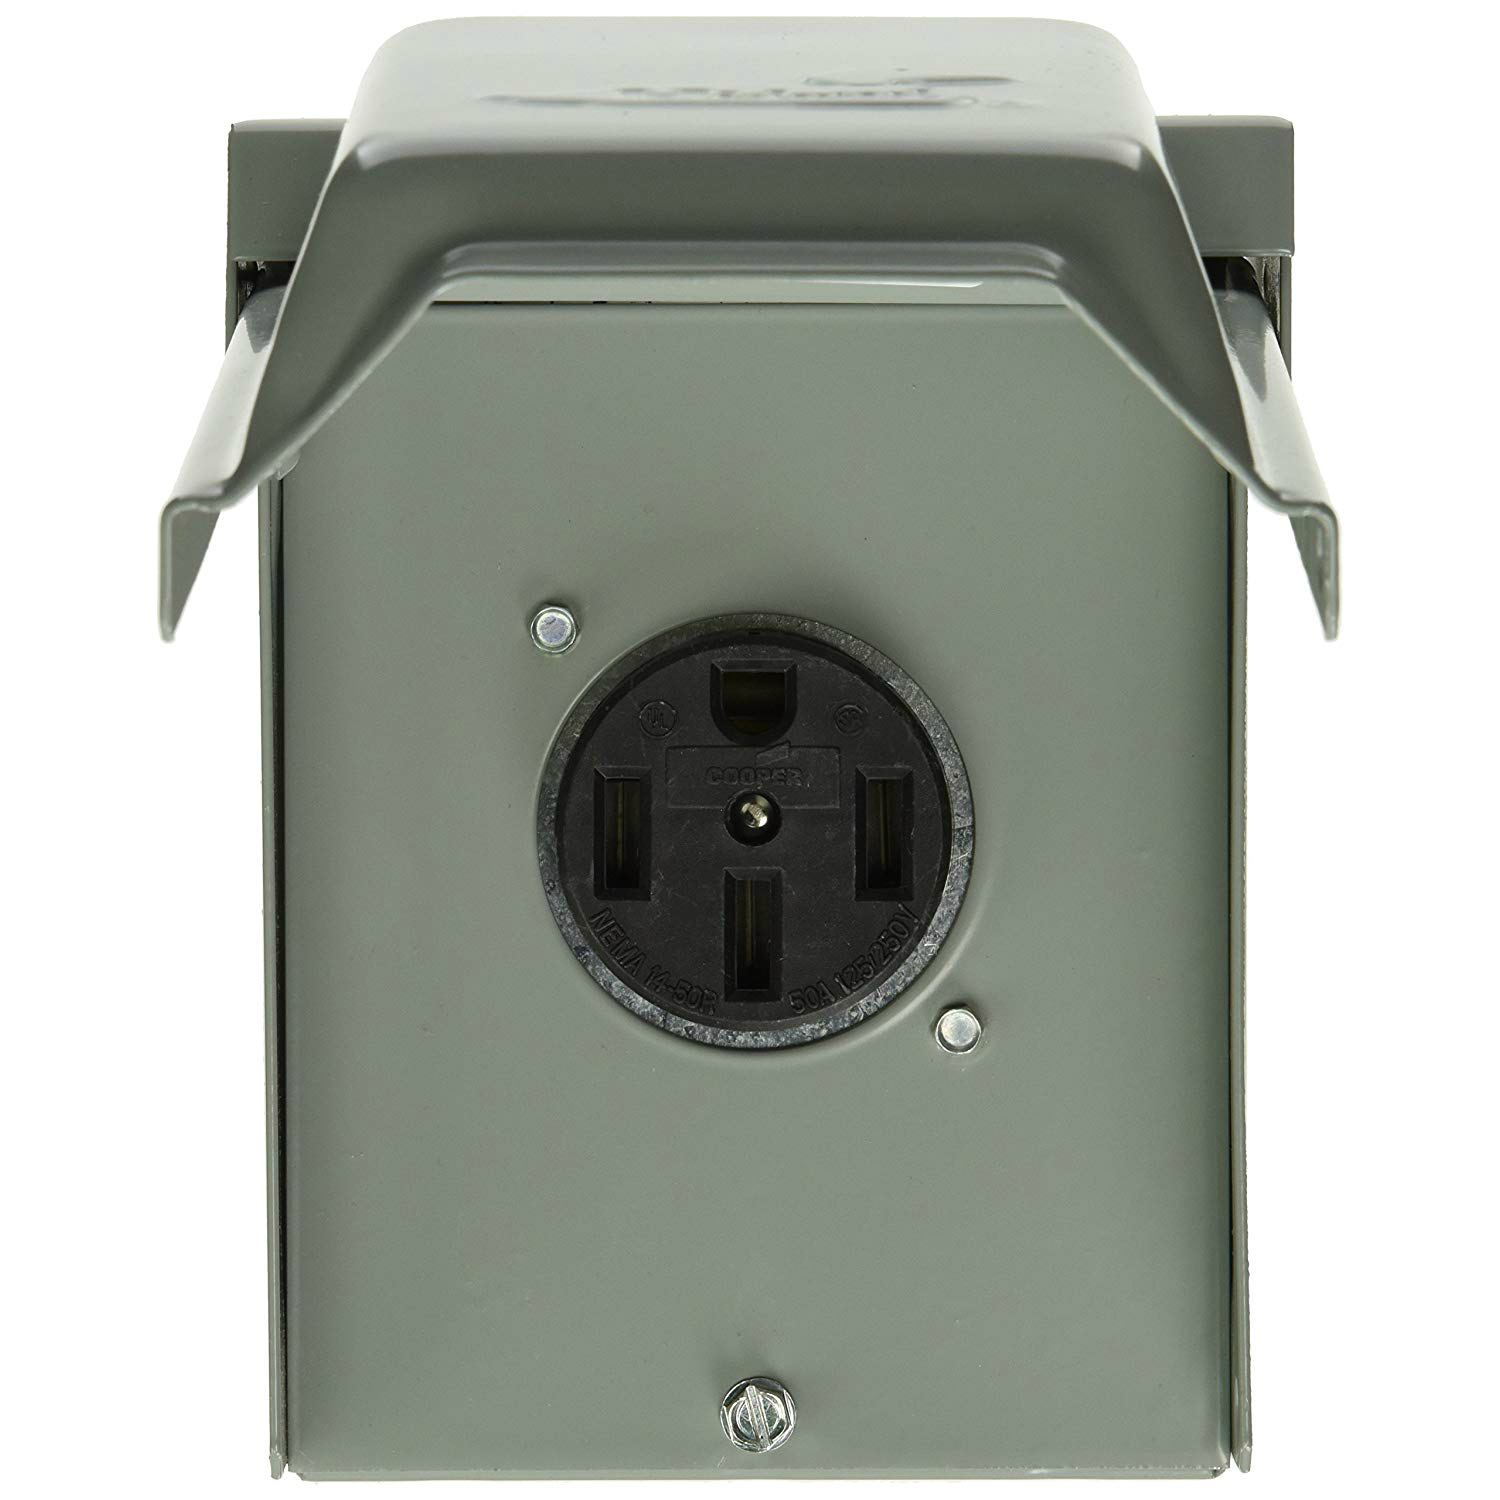 GE U054P Power Outlet Panel, 50 Amp - image 1 of 2